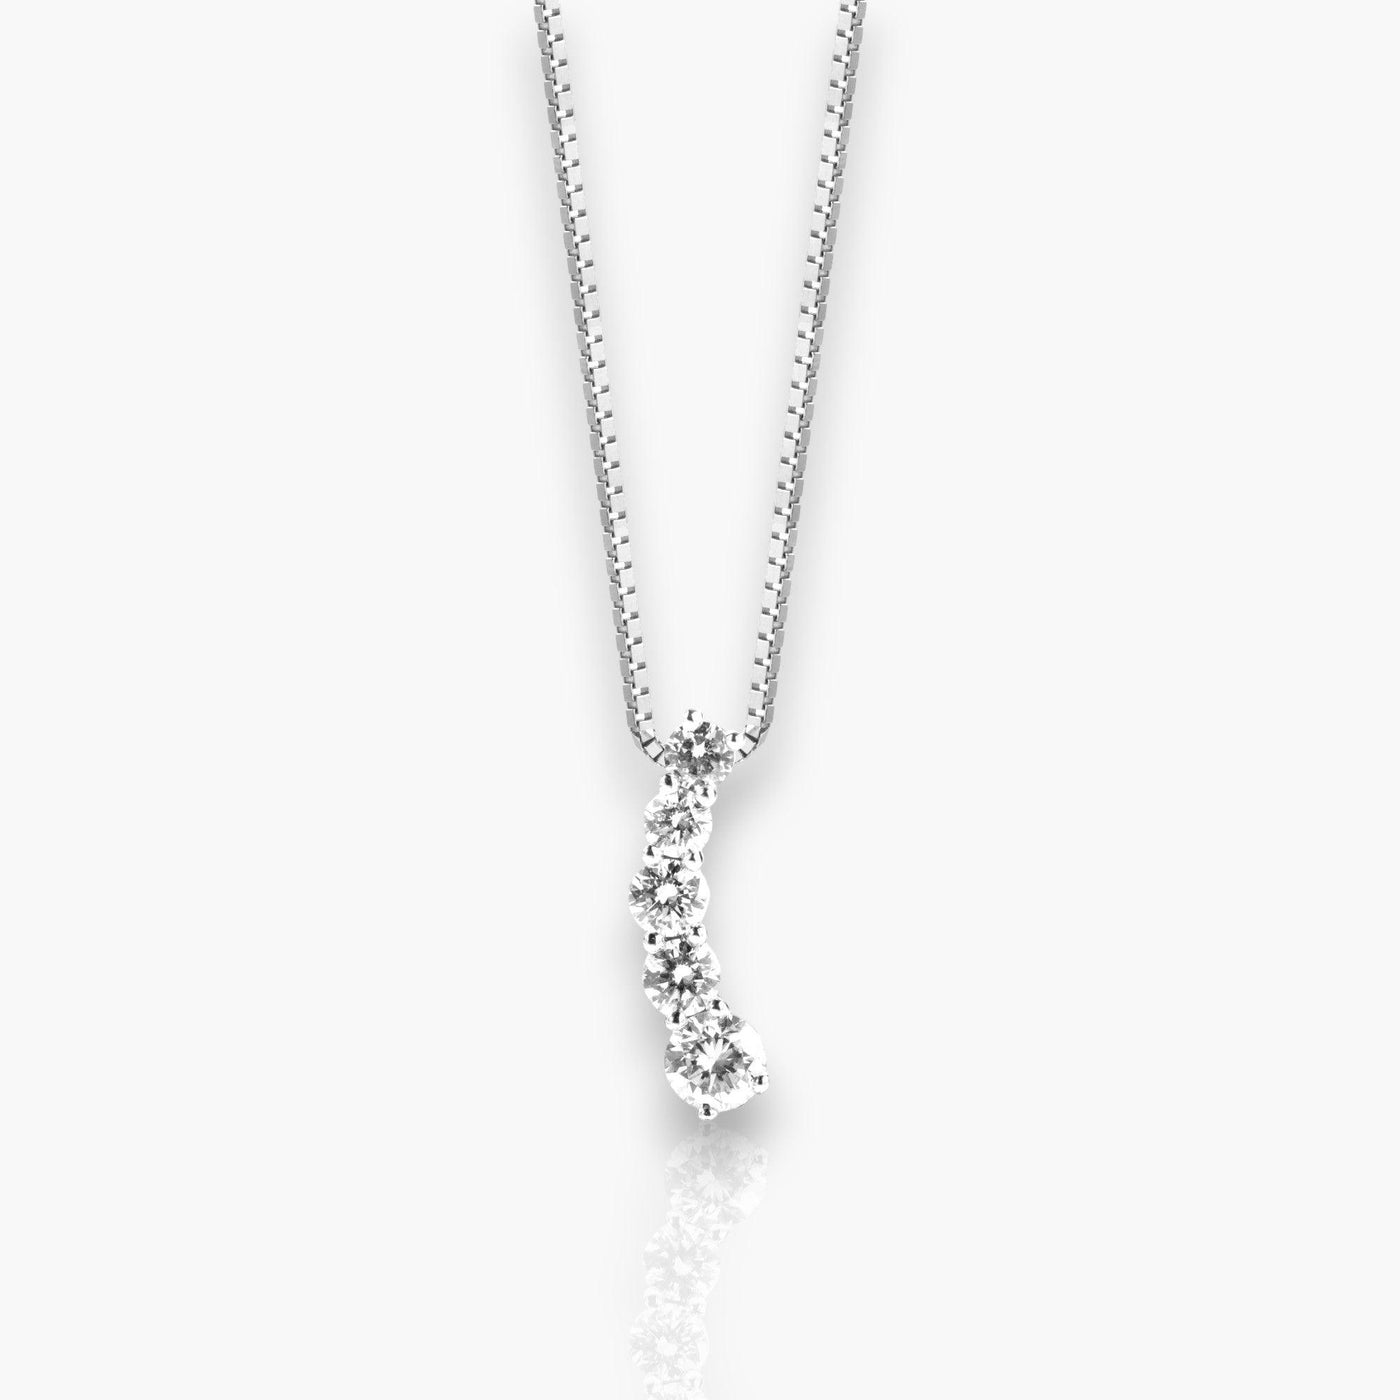 Necklace in White Gold with 5 Diamonds - Moregola Fine Jewelry